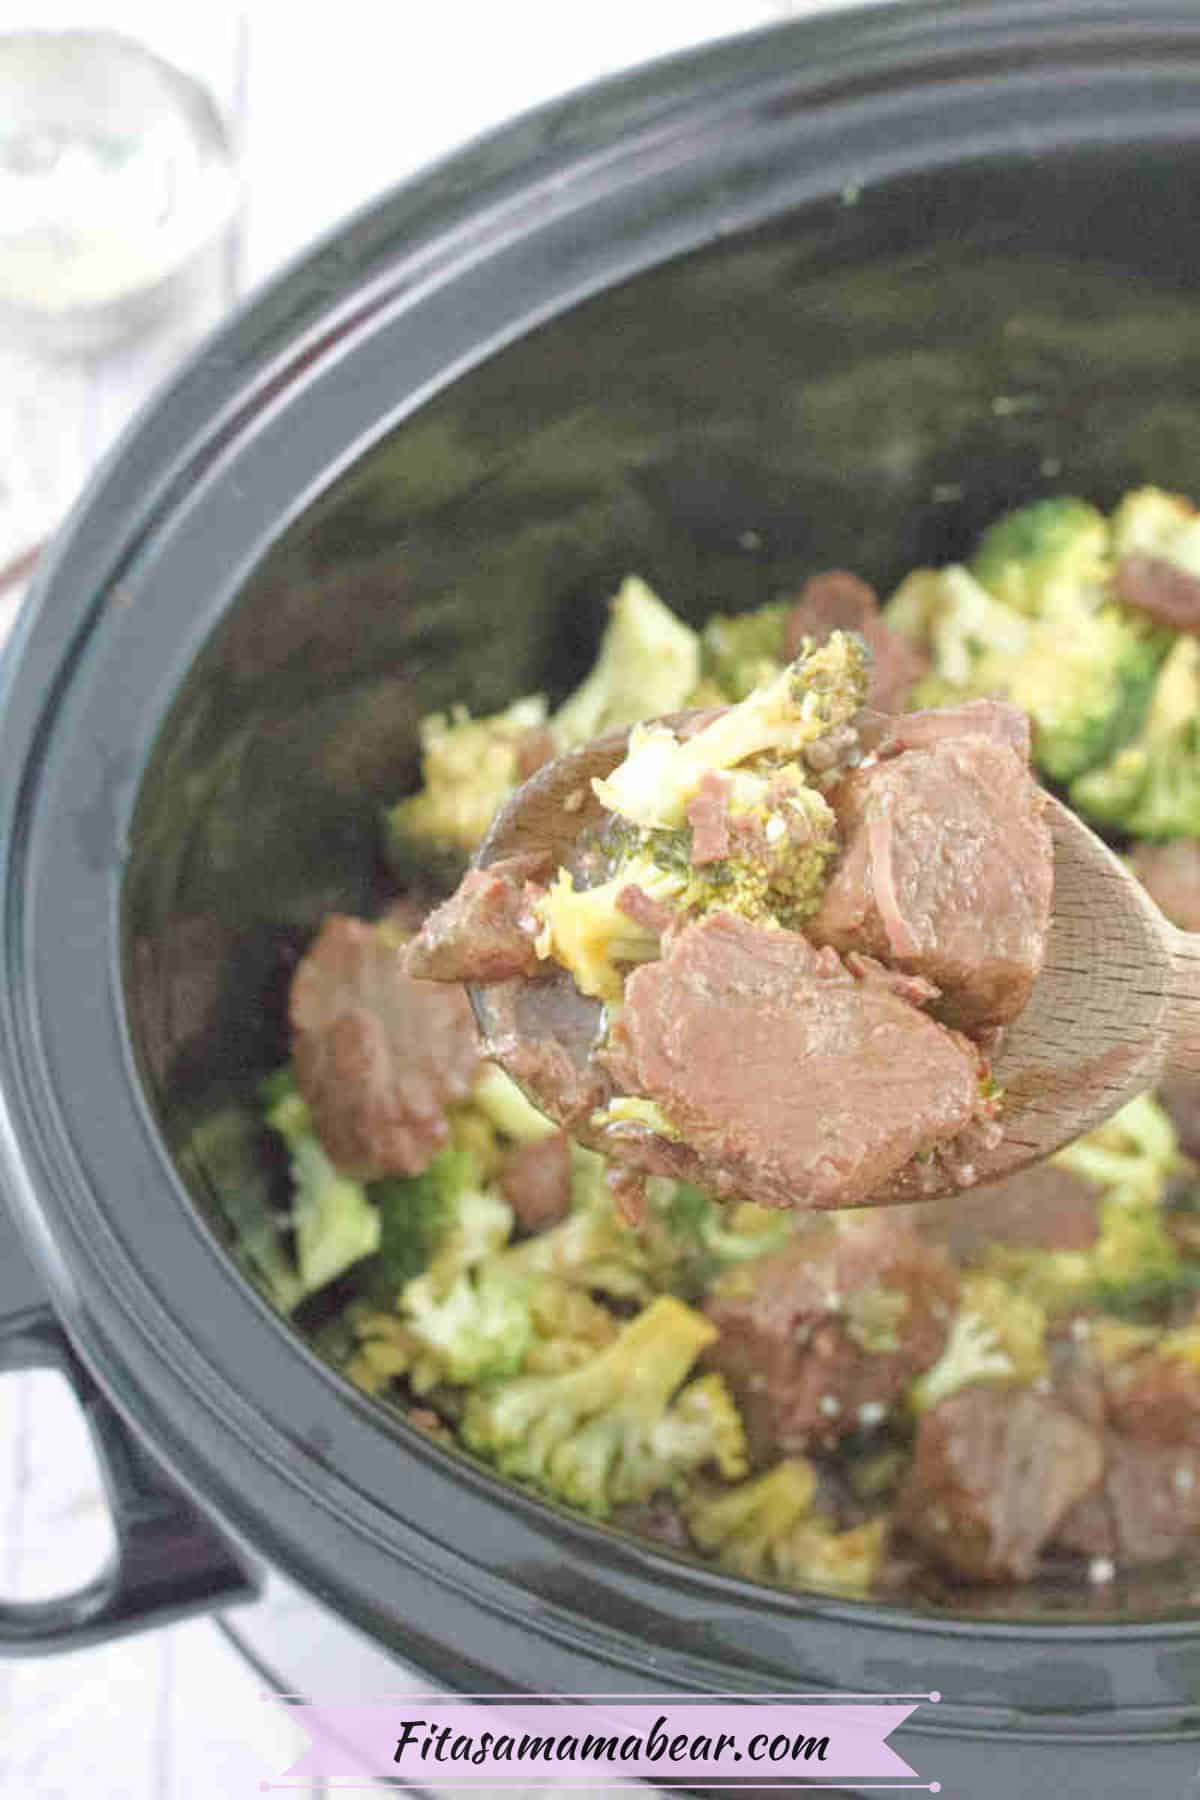 Black slow cooker with beef and broccoli in it and a wooden spoon holding some of the gluten-free beef and broccoli.